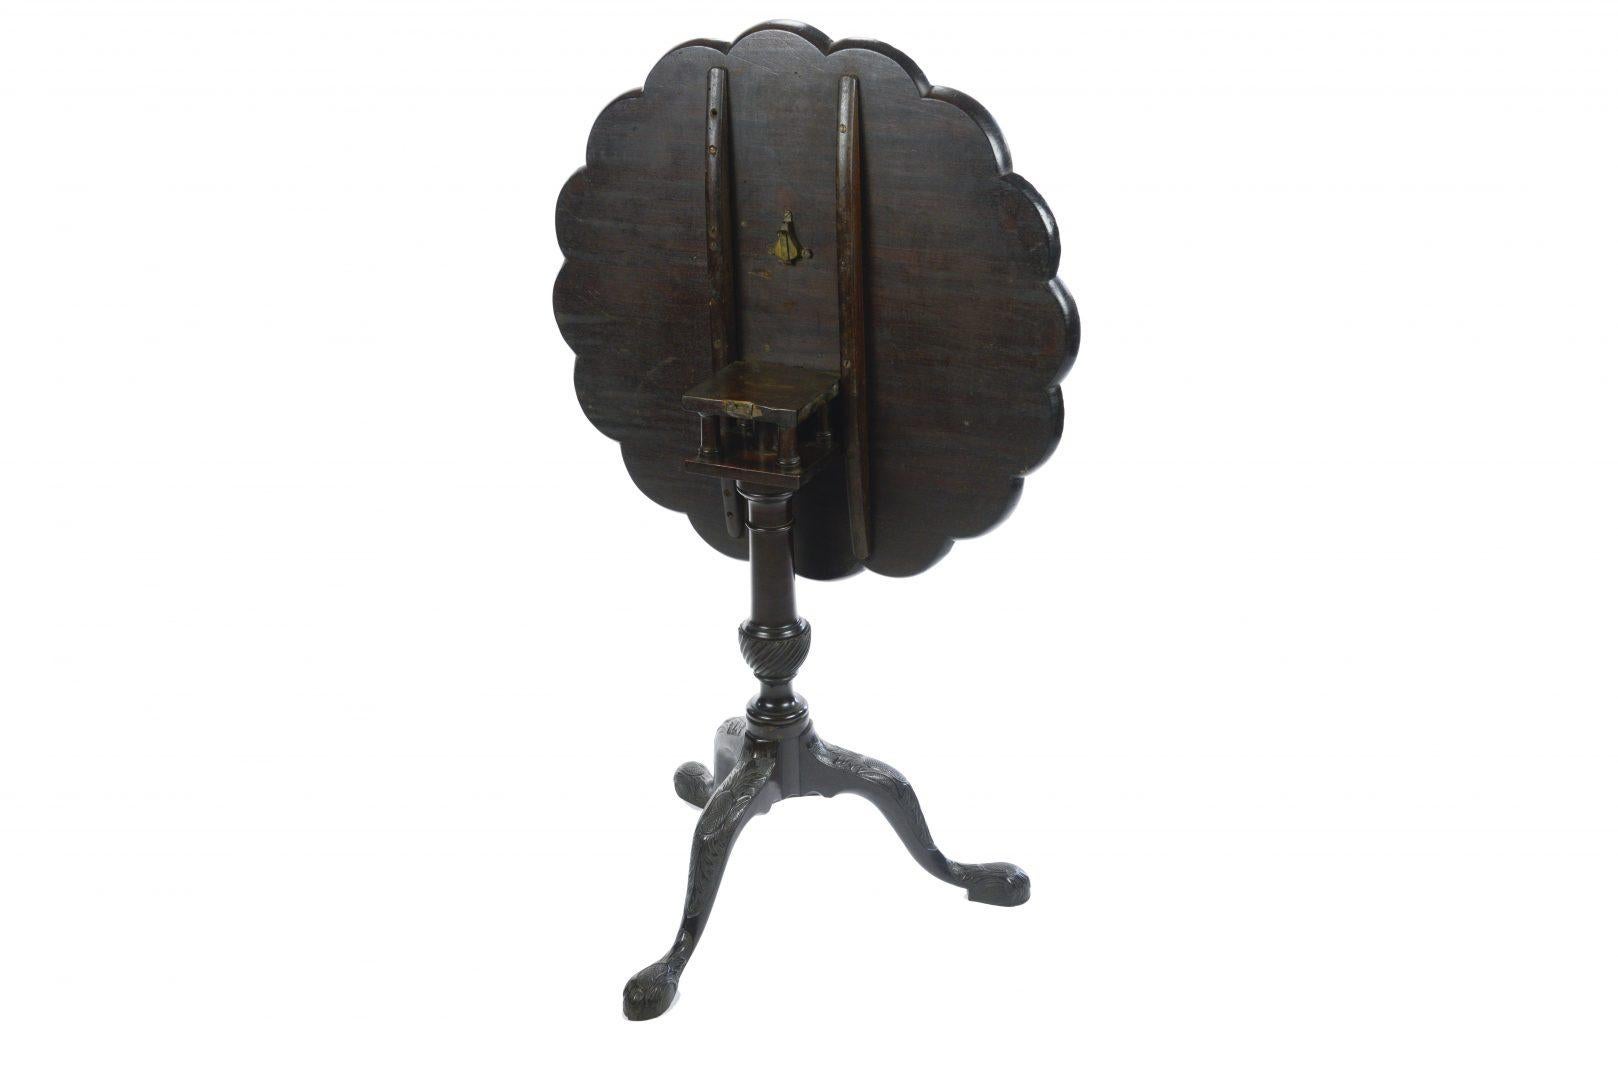 Chippendale style, early 19 century, Edwards & Roberts: a mahogany supper table, the shaped top with eight roundels with a central foliate motif against a matted ground, on a birdcage base and vase-shaped turned upright and three cabriole legs with